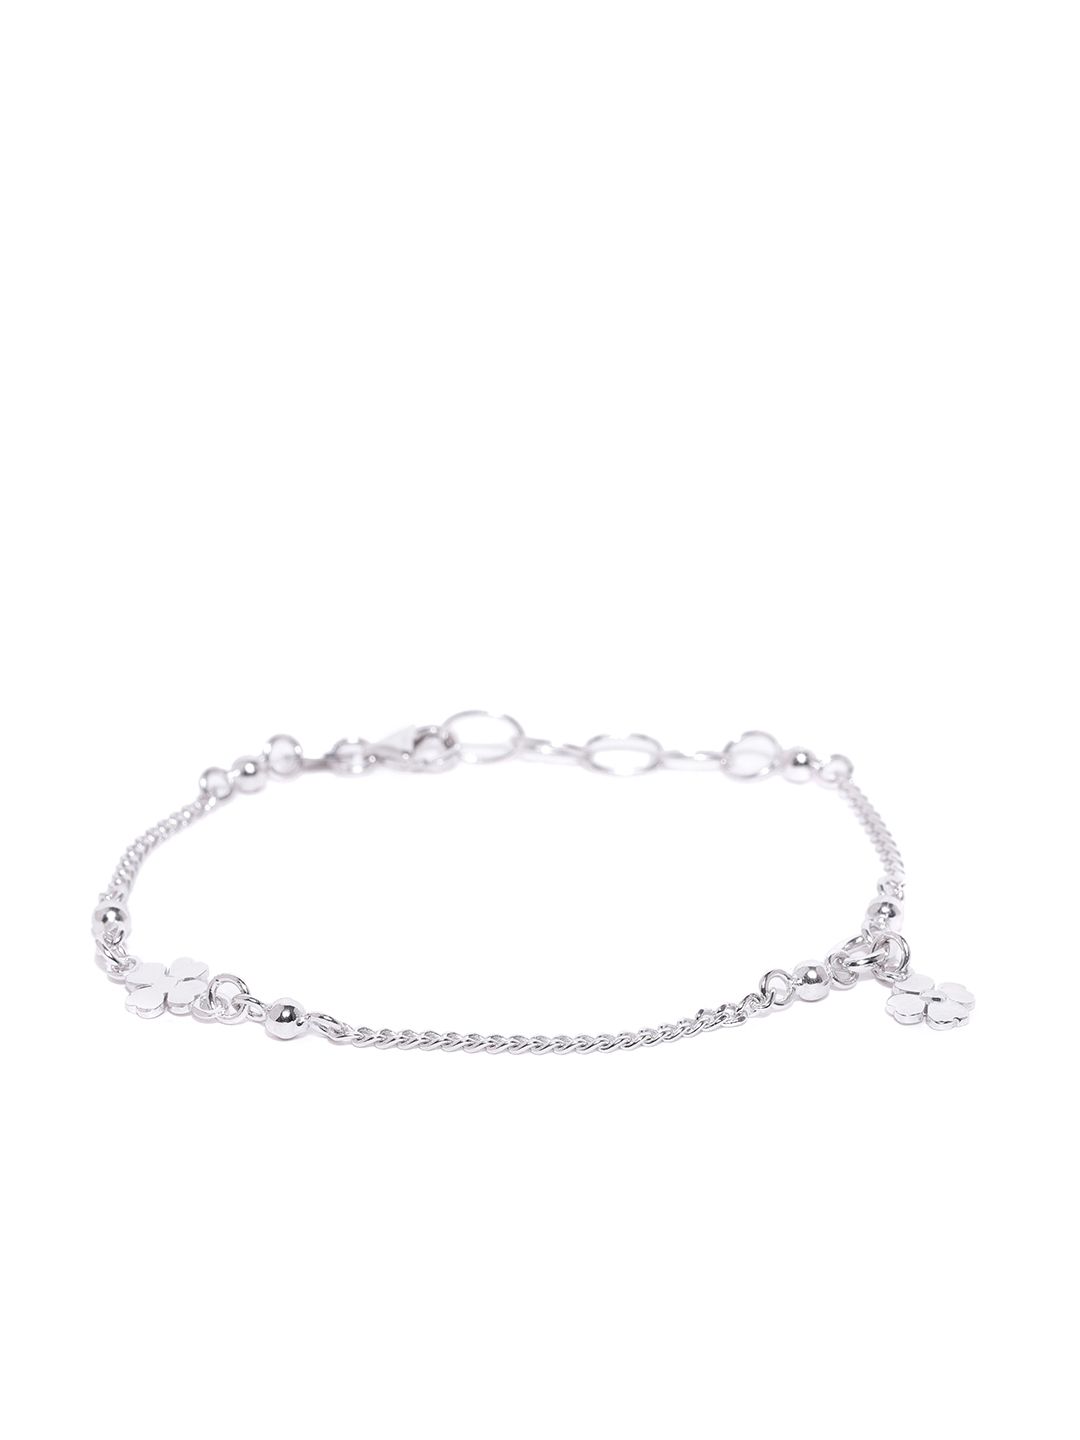 Carlton London Silver-Toned Rhodium-Plated Floral Charm Bracelet Price in India